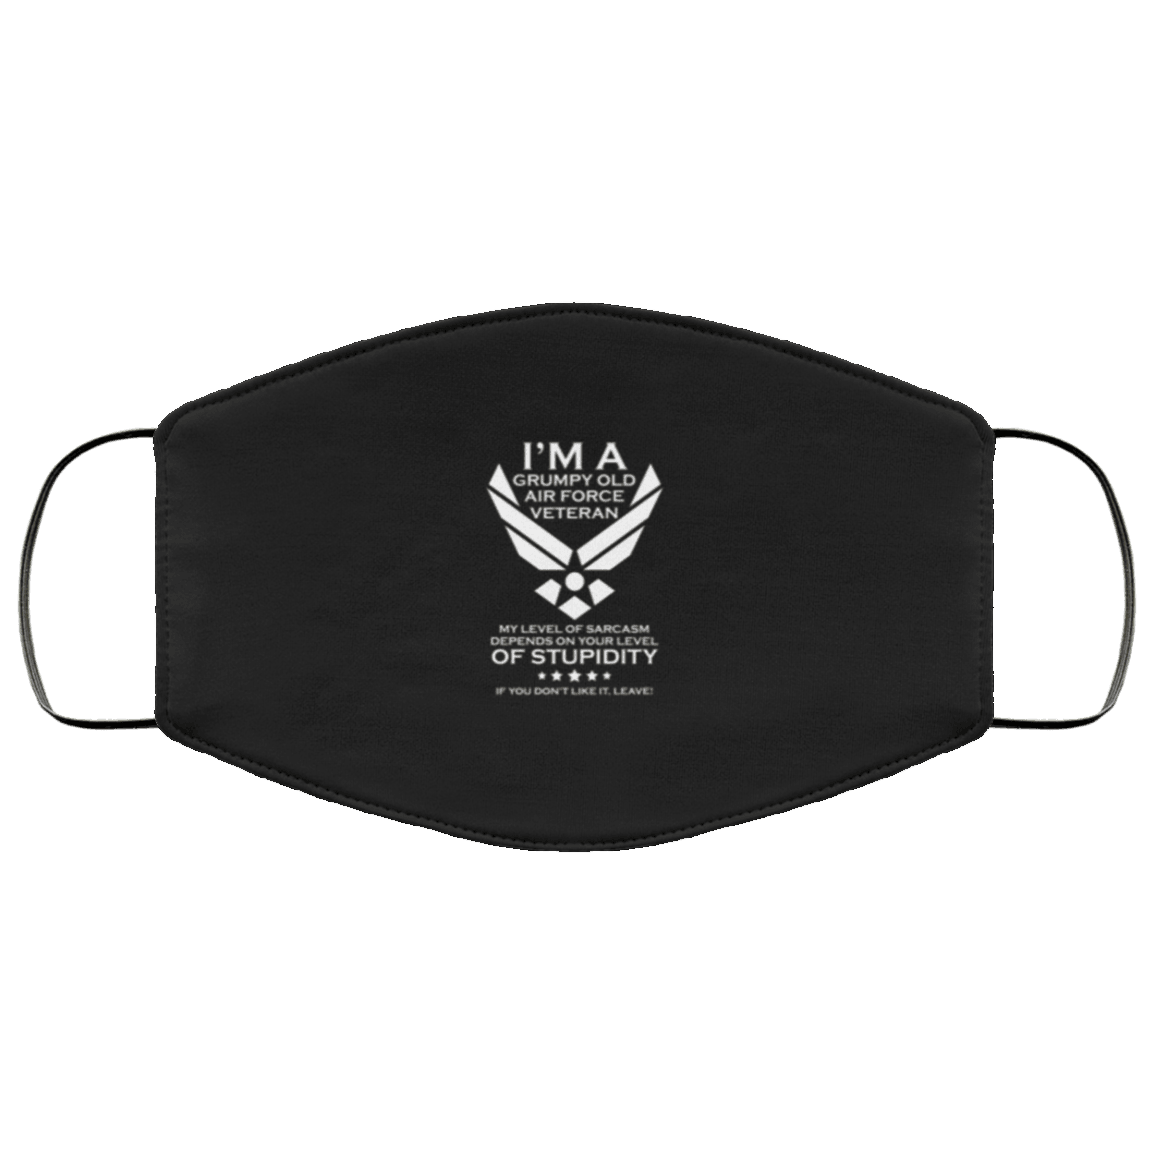 Designs by MyUtopia Shout Out:Grumpy Old Air Force Veteran Adult Fabric Face Mask with Elastic Ear Loops,3 Layer Fabric Face Mask / Black / Adult,Fabric Face Mask